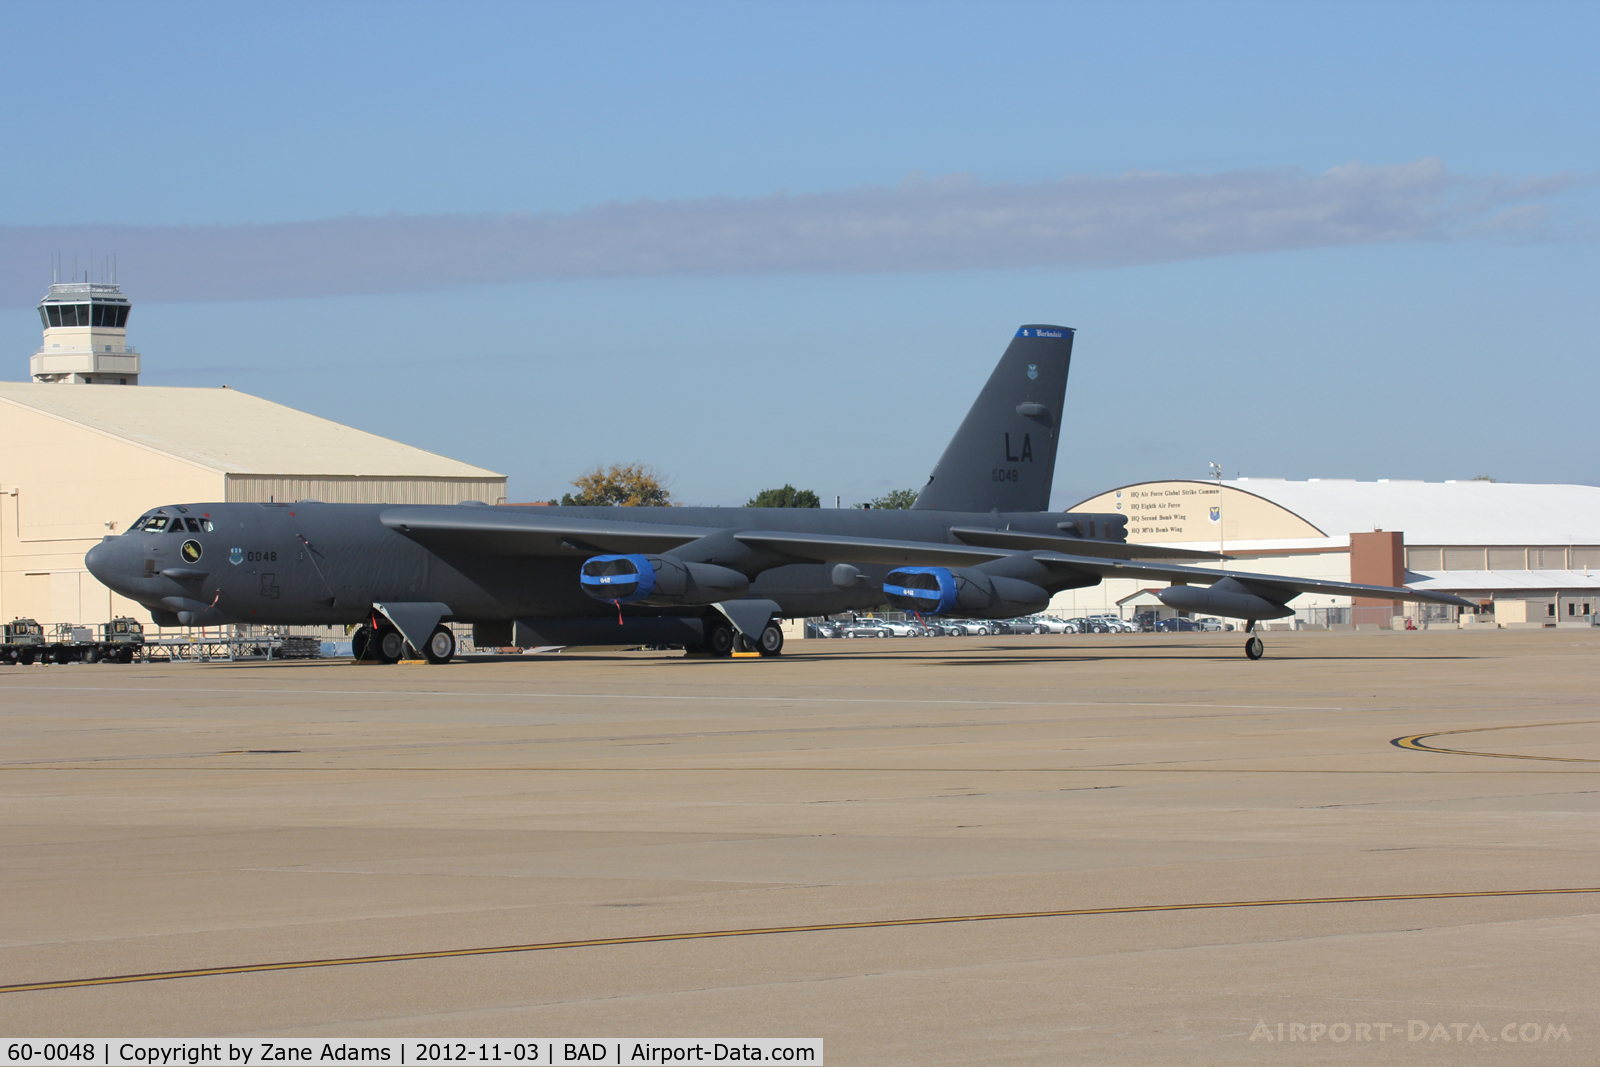 60-0048, 1960 Boeing B-52H Stratofortress C/N 464413, On the ramp at Barksdale AFB